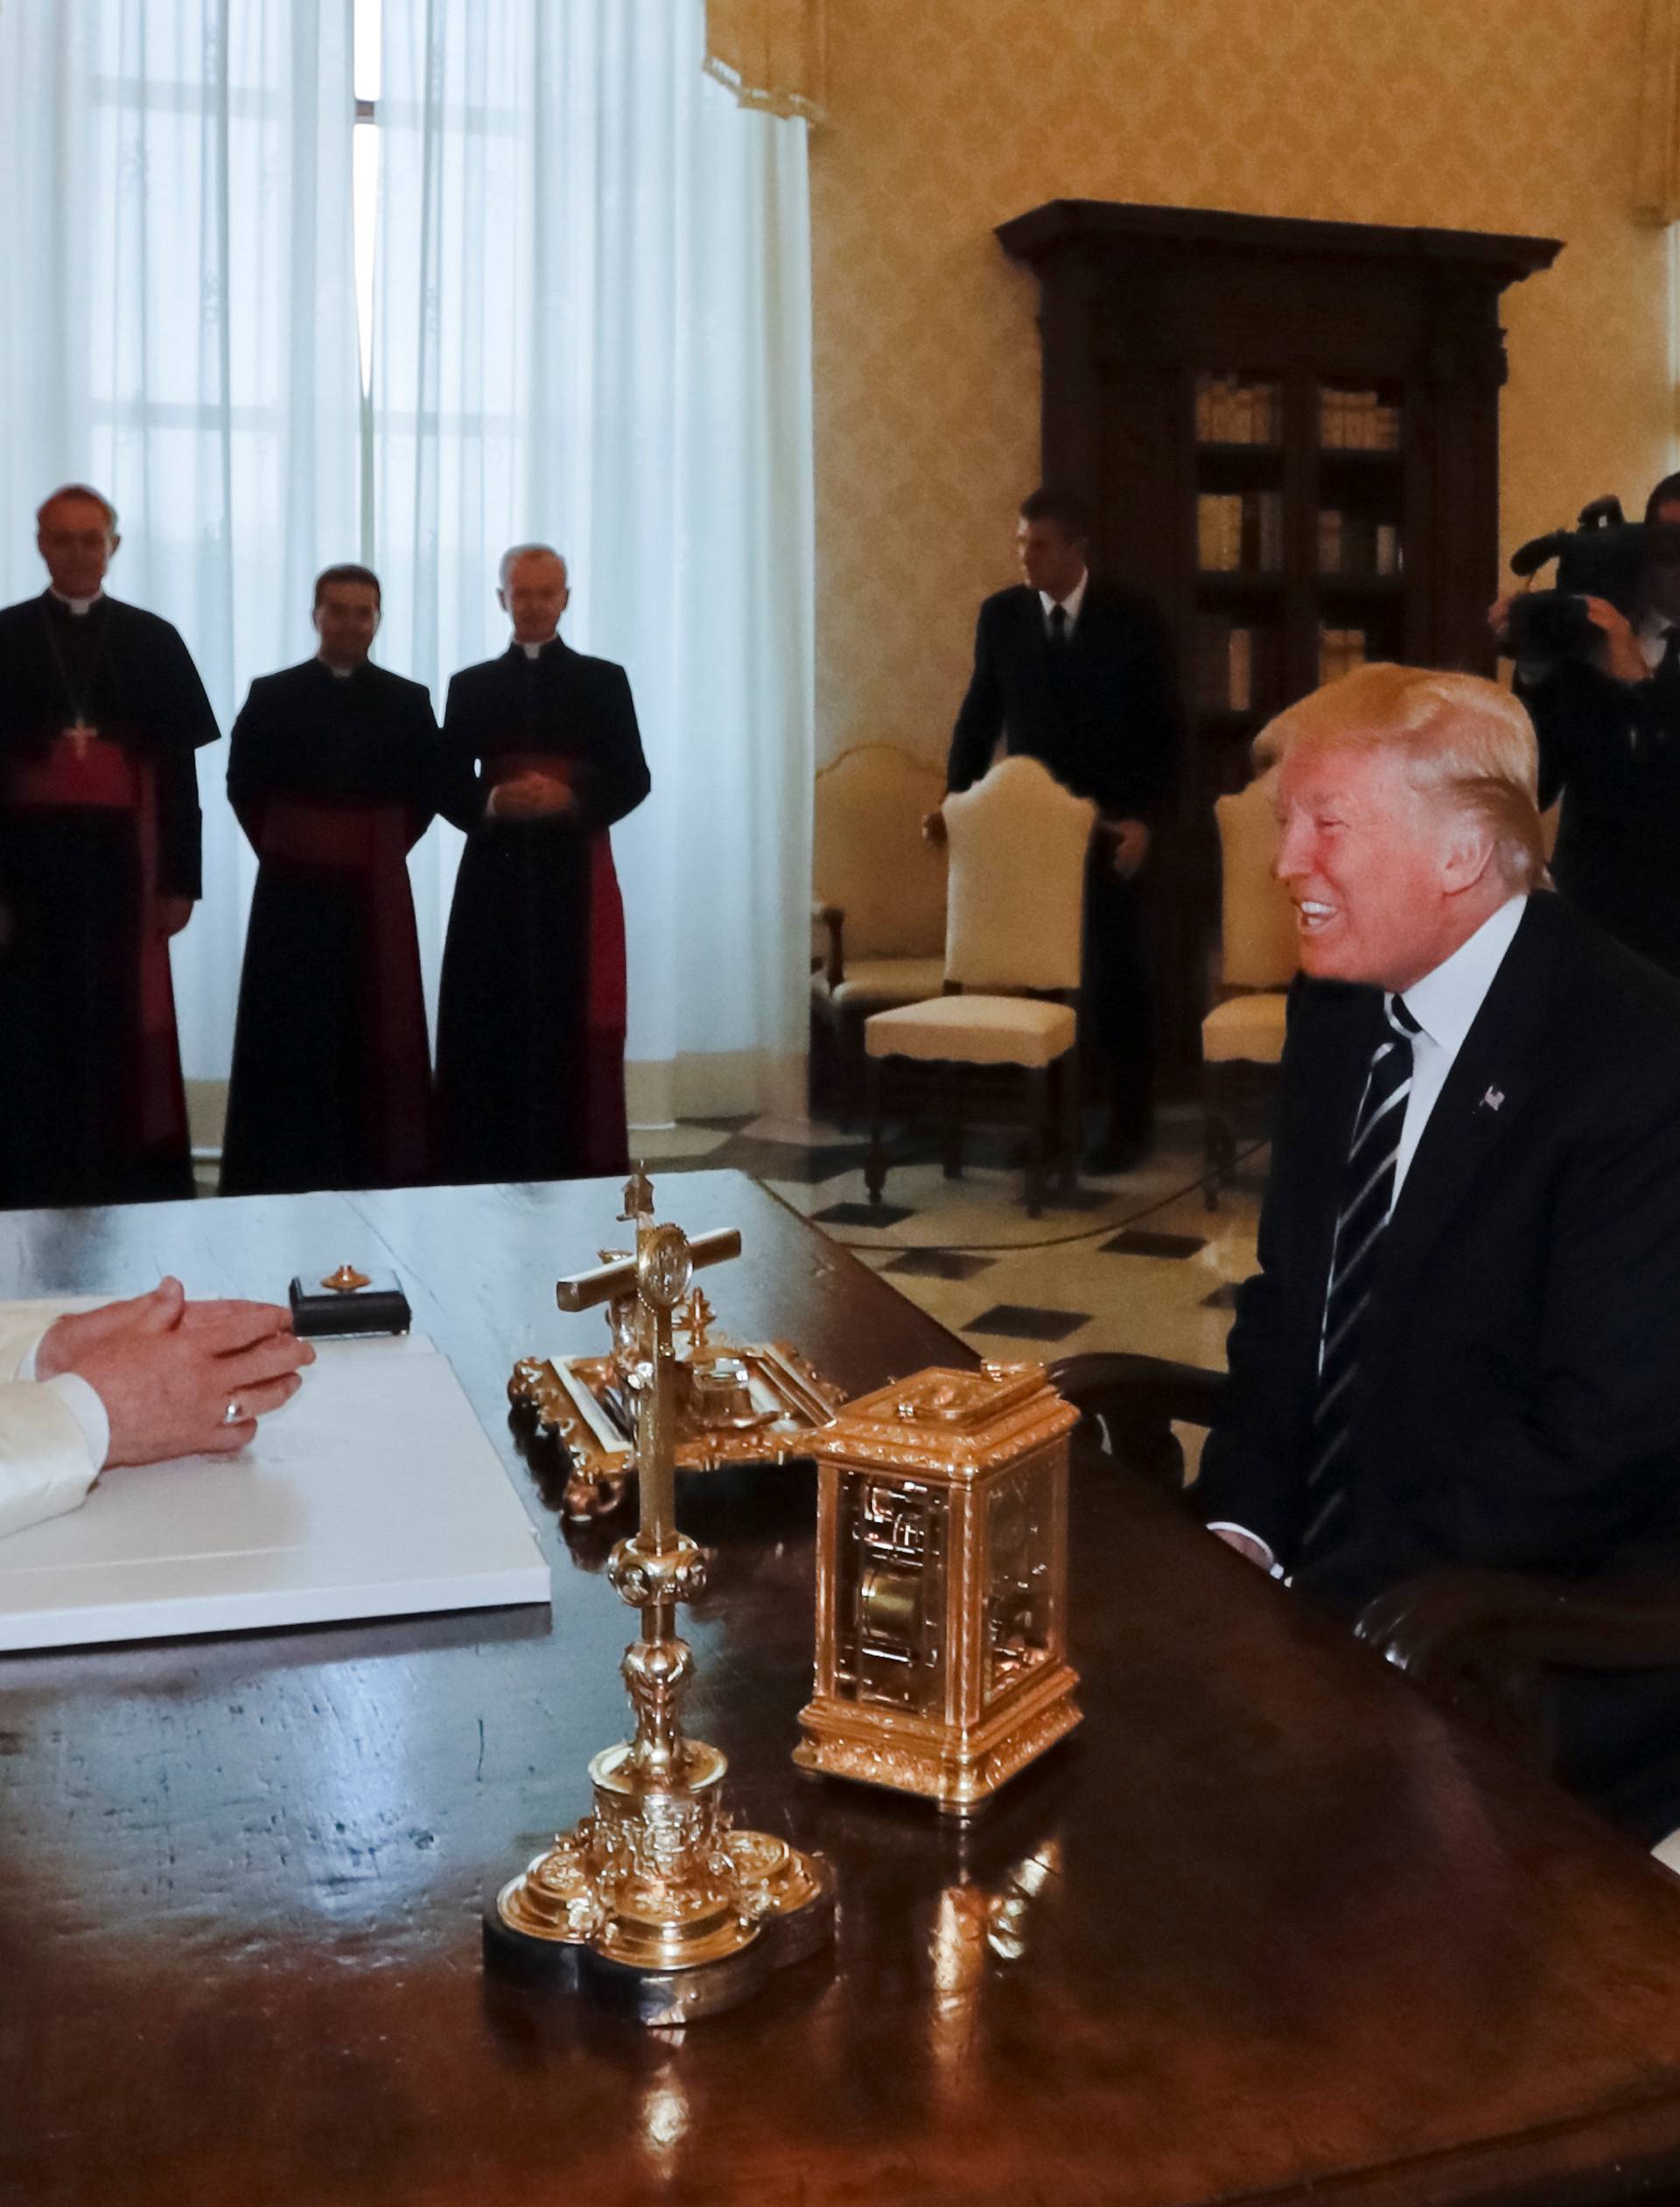 Pope Francis meets U.S. President Donald Trump during a private audience at the Vatican